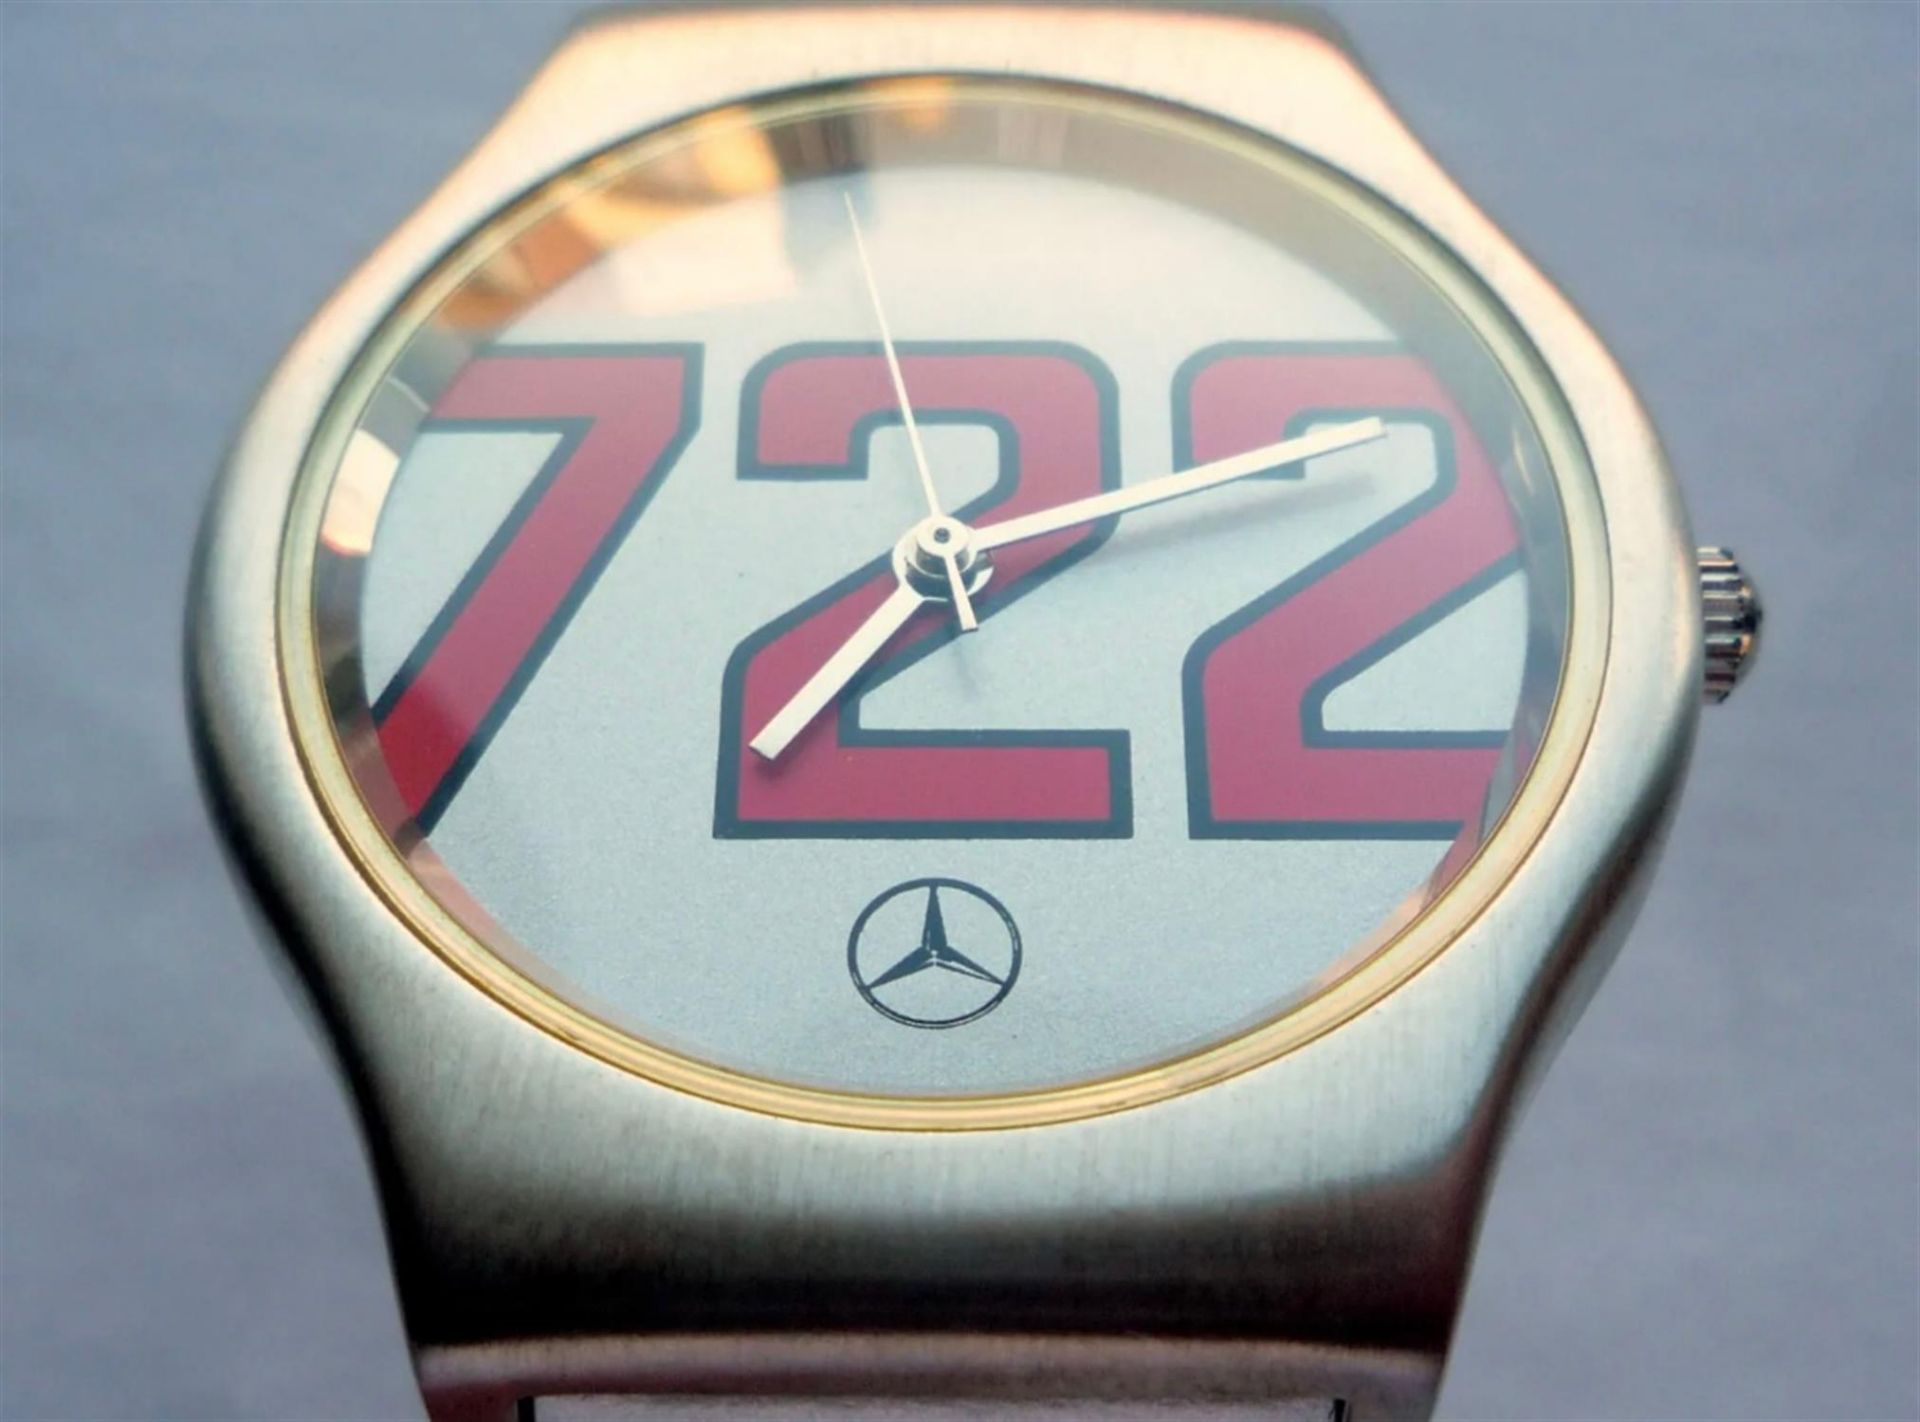 A Rare and Genuine Mercedes-Benz 722 Mille Miglia Classic Racing Watch - Image 5 of 10